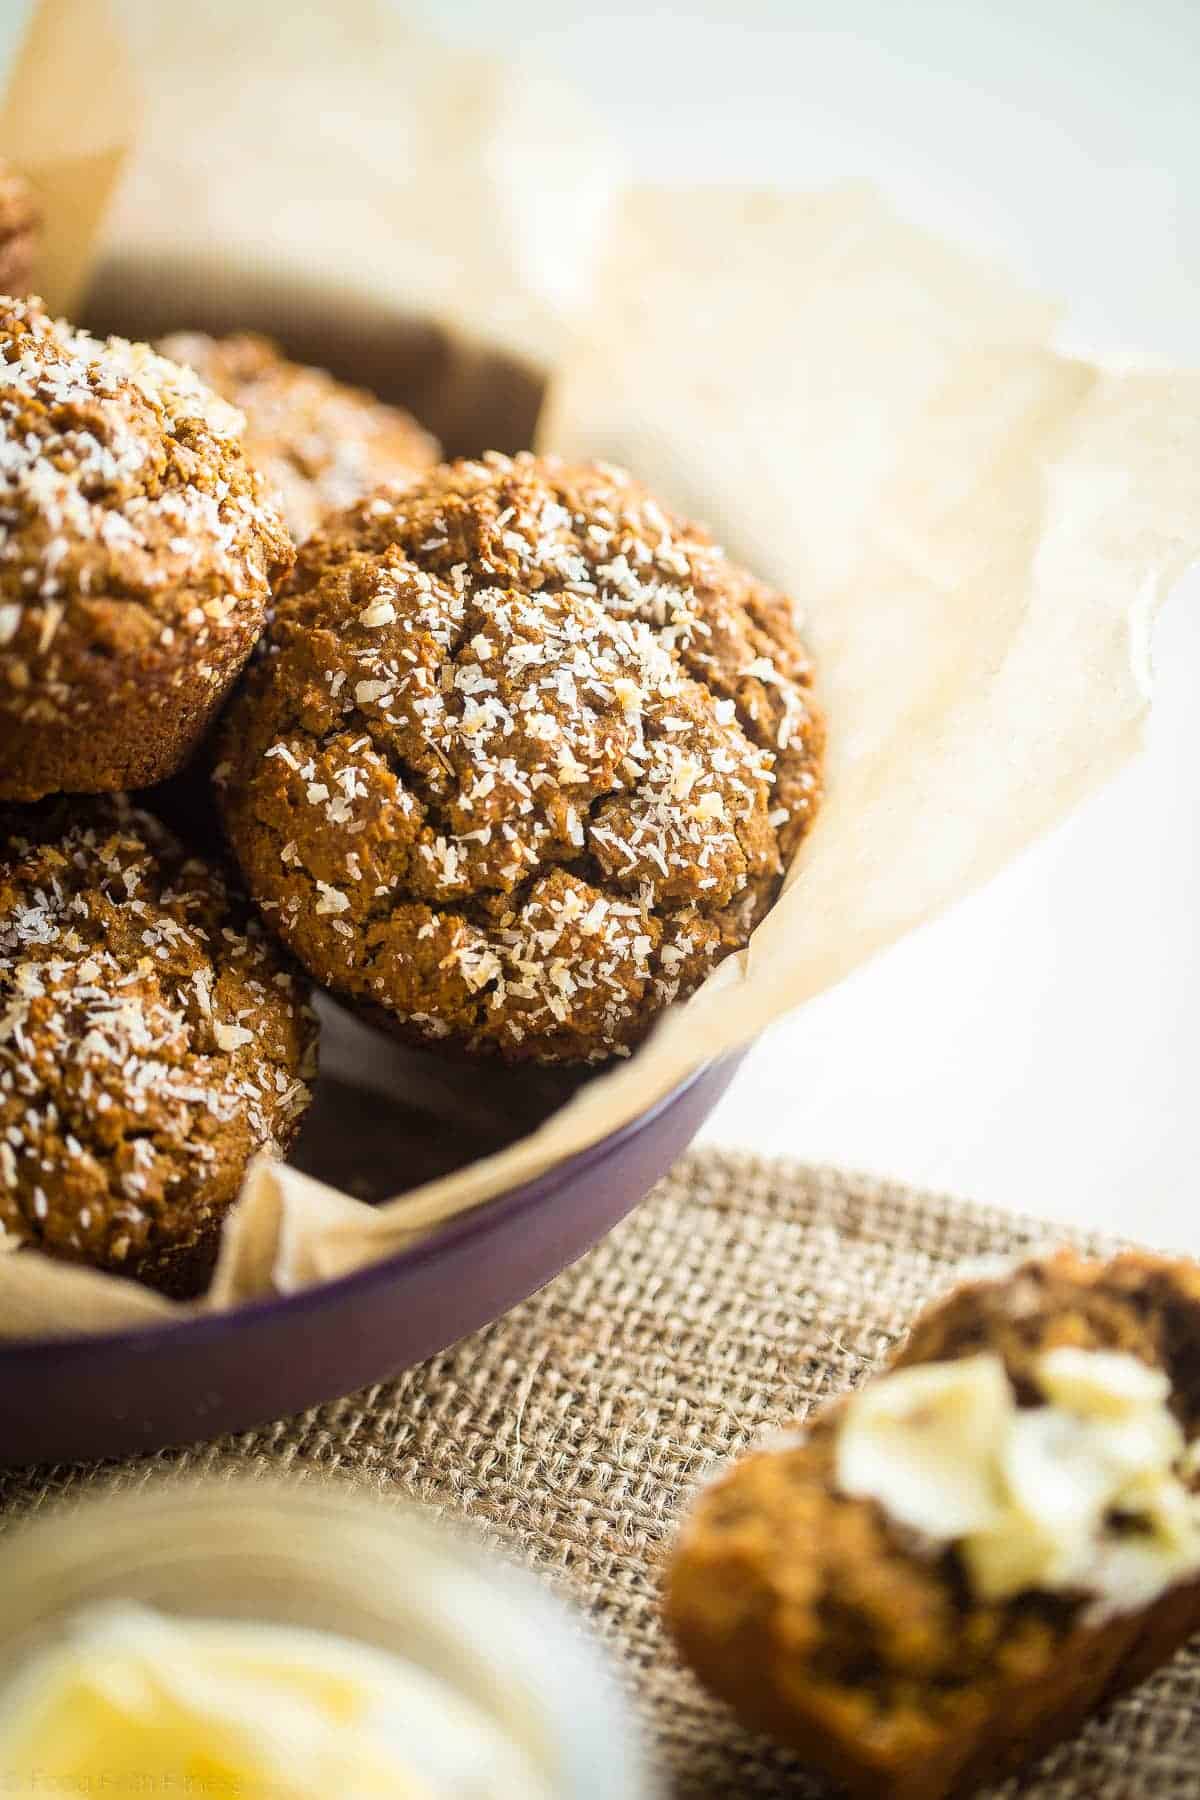 Gluten Free Vegan Vanilla Chai Protein Muffins - These are muffins are loaded with spicy-sweet chai flavor, protein and are SO easy to make! Perfect for a portable, healthy breakfast or snack that freezes well! | Foodfaithfitness.com | @FoodFaithFit